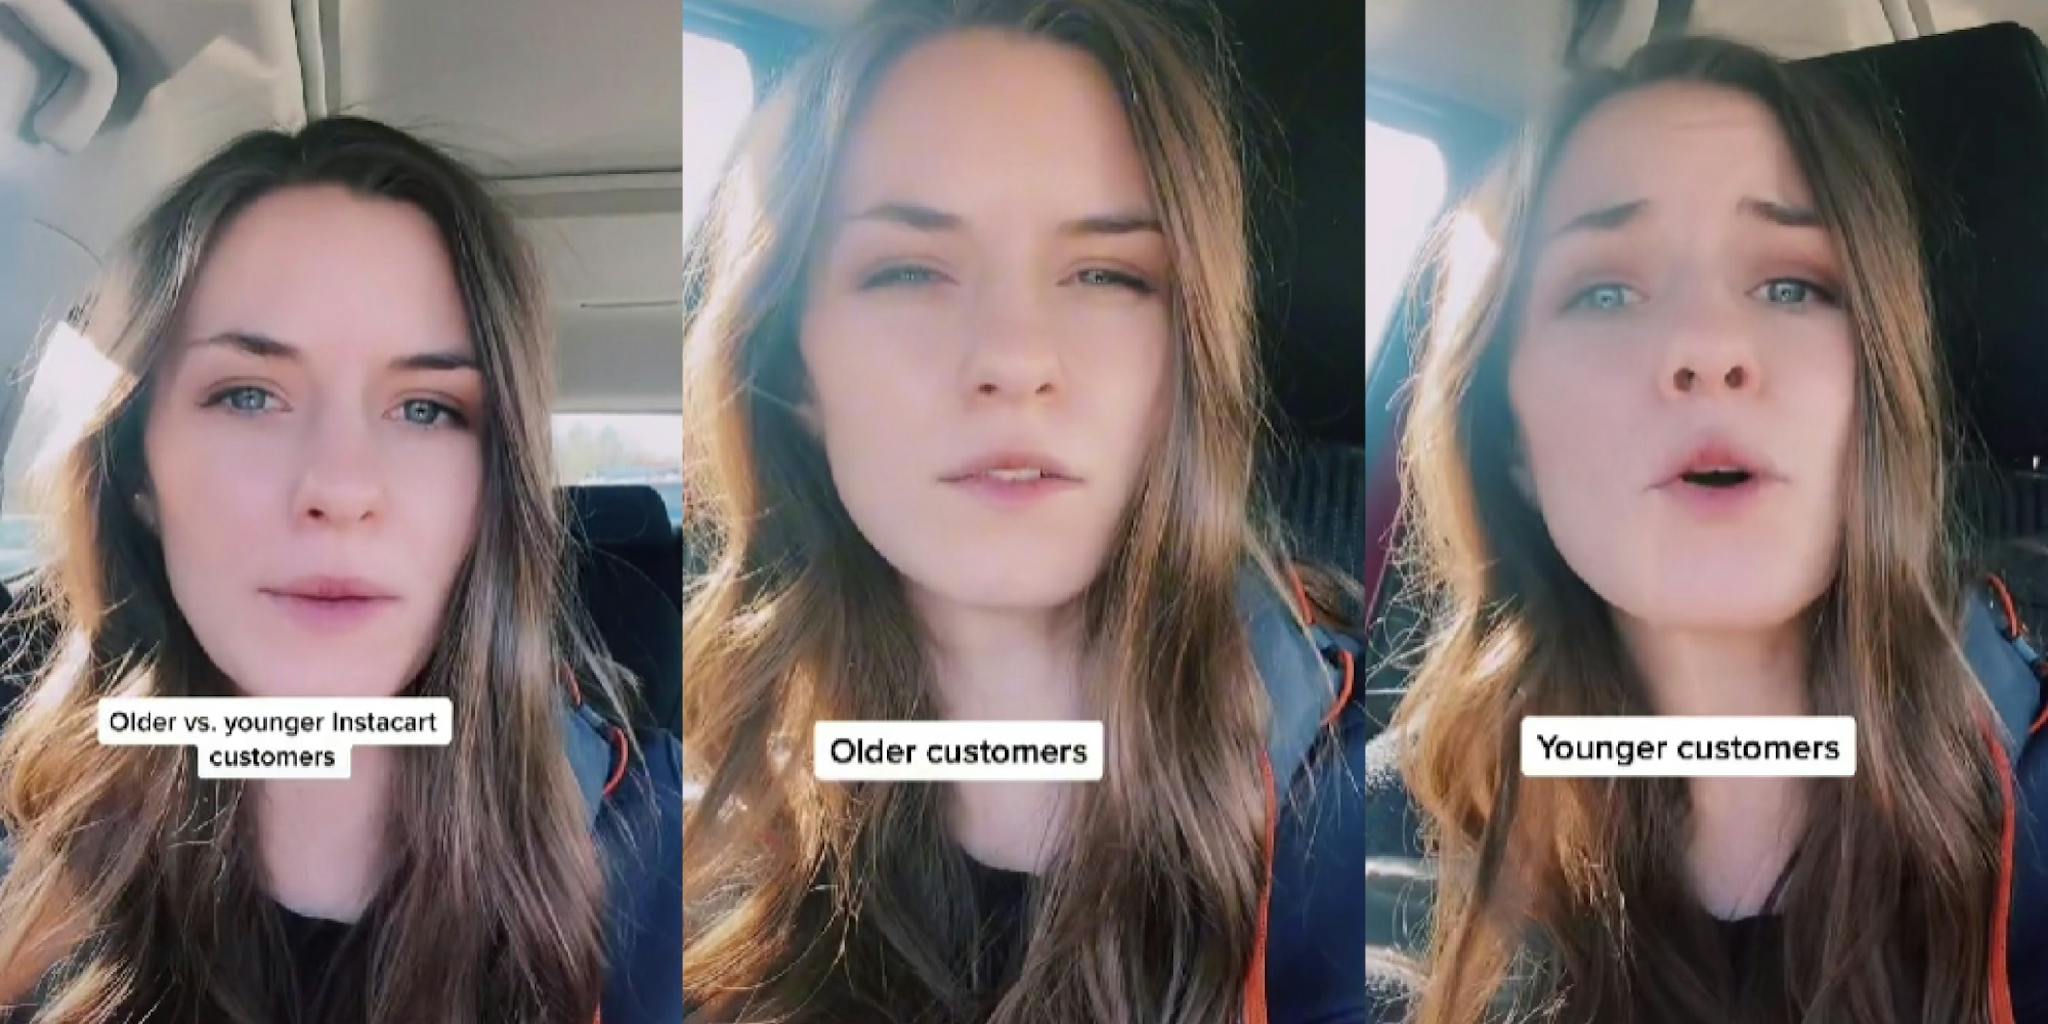 ‘Literally why are boomers so mean’: Viral TikTok highlights differences between ‘younger’ and ‘older’ Instacart customers